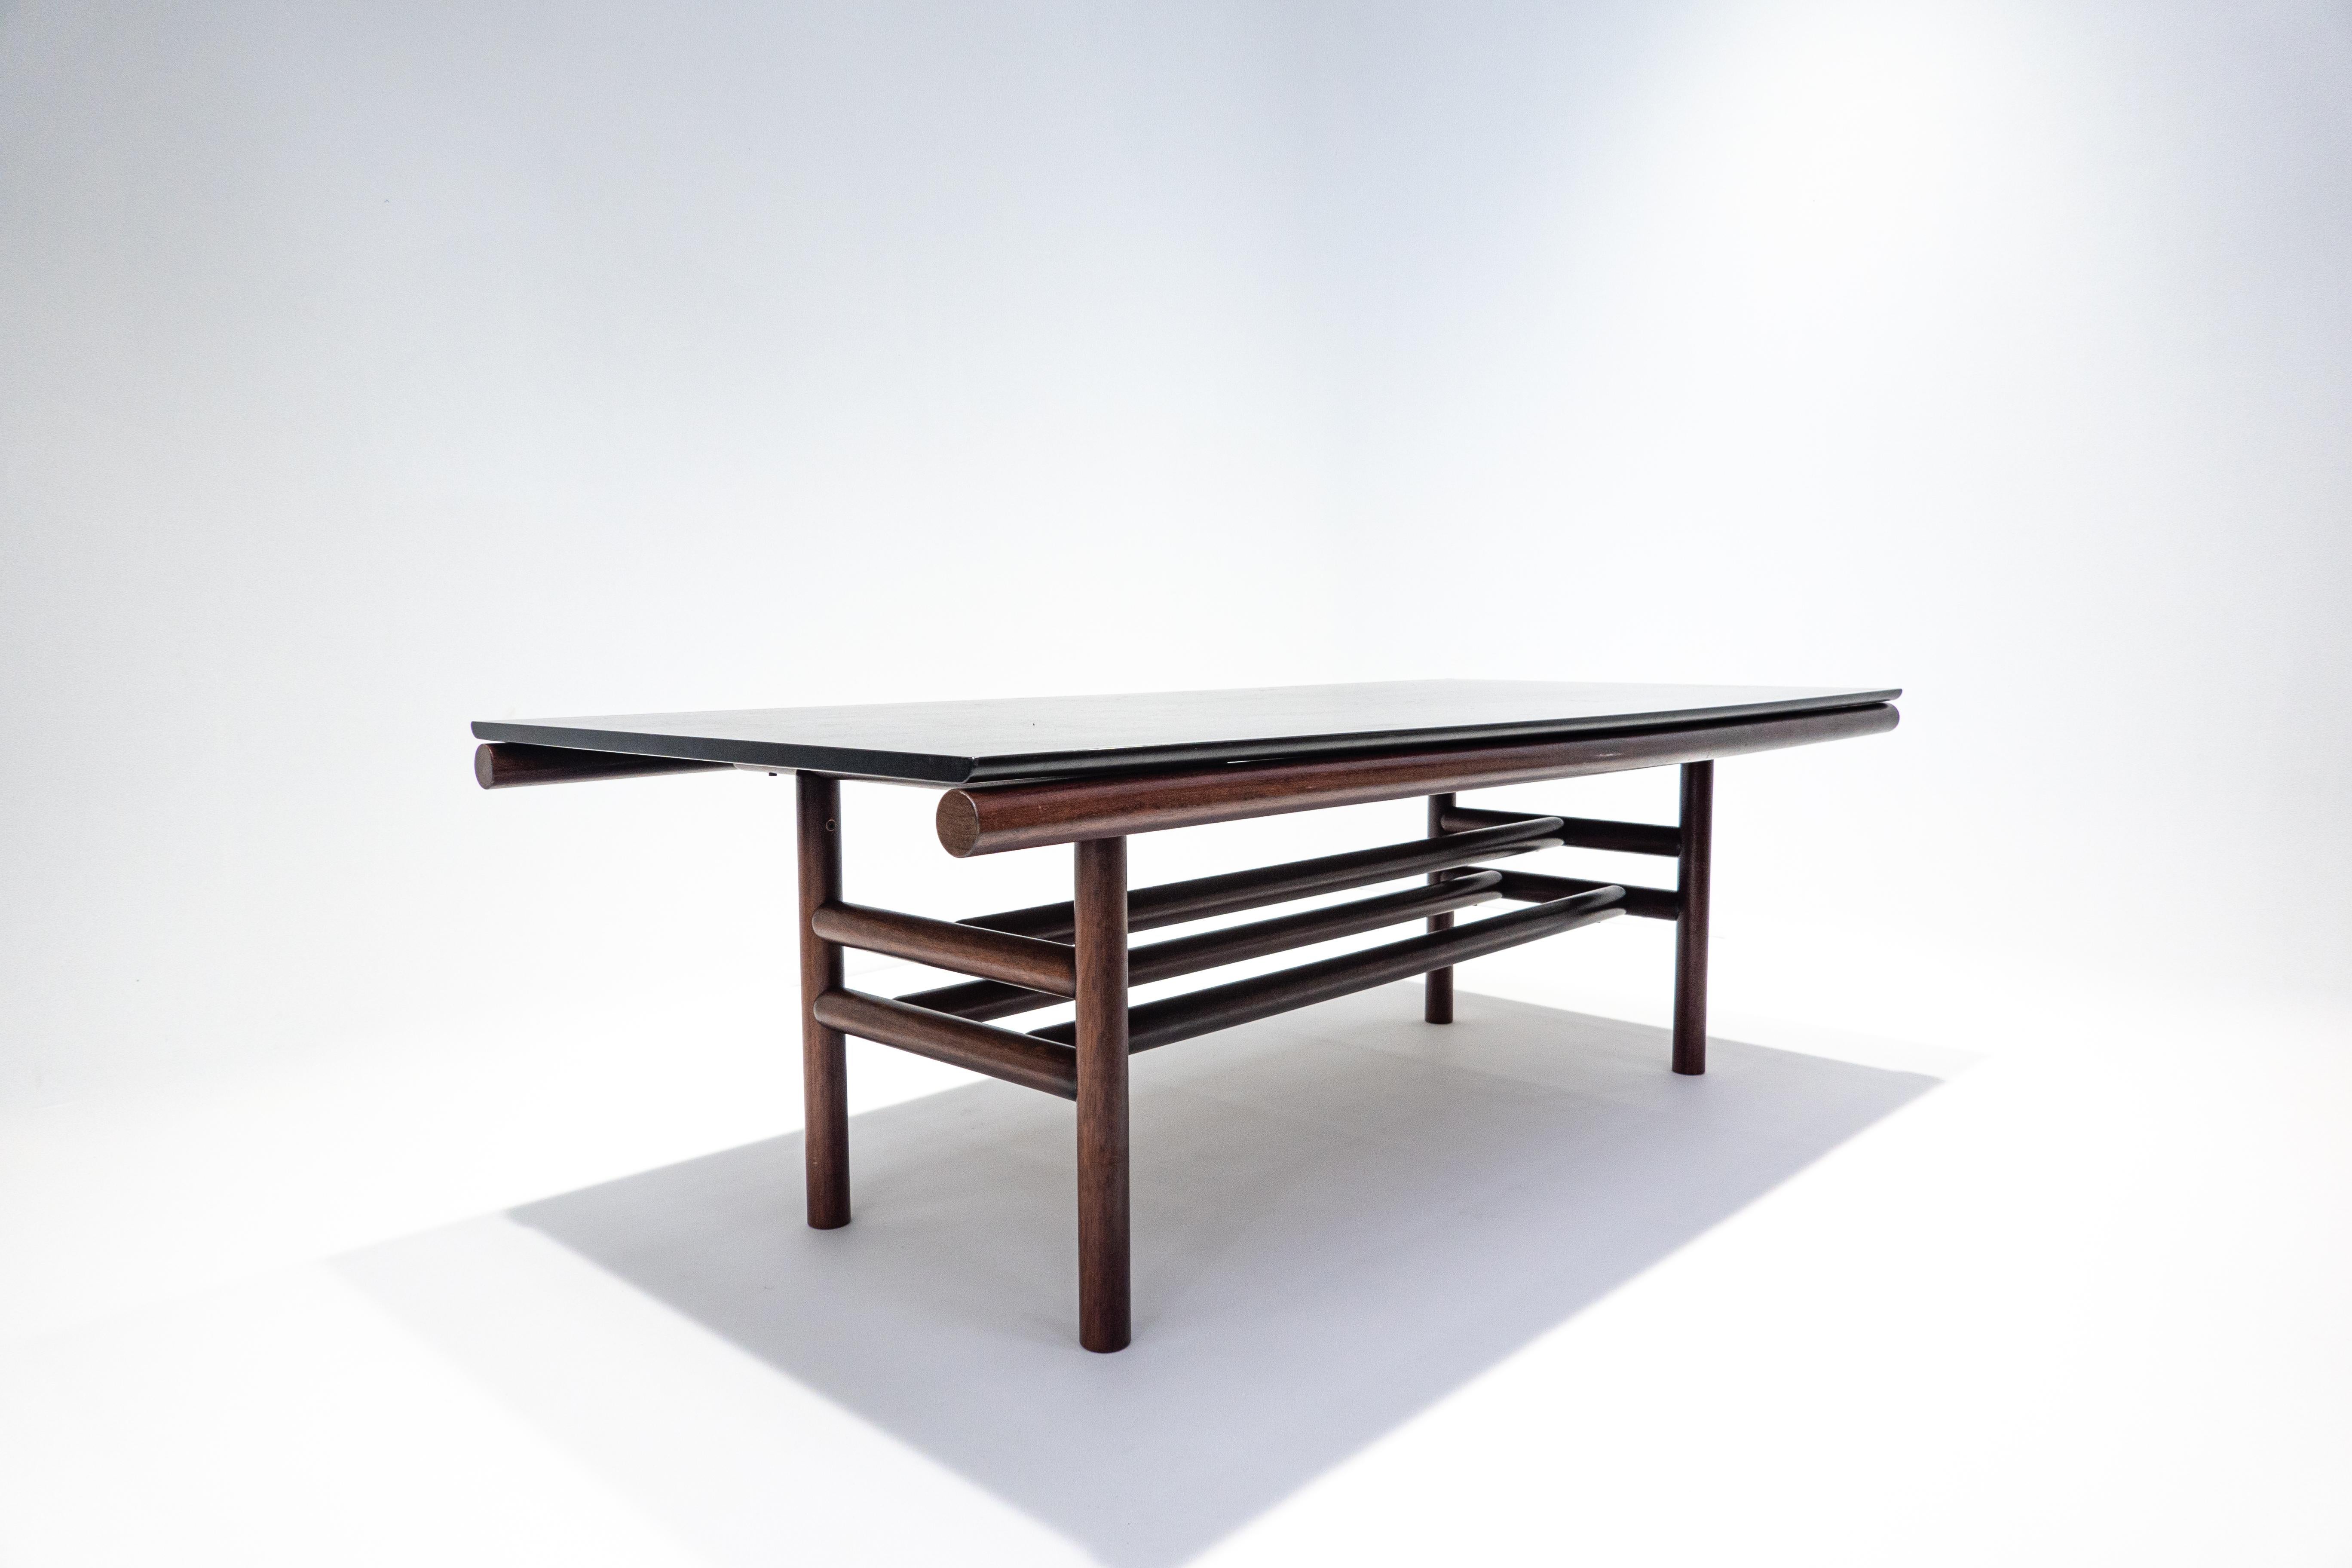 Gritti Wooden dining table by Carlo Scarpa for Simon International, 1970s.